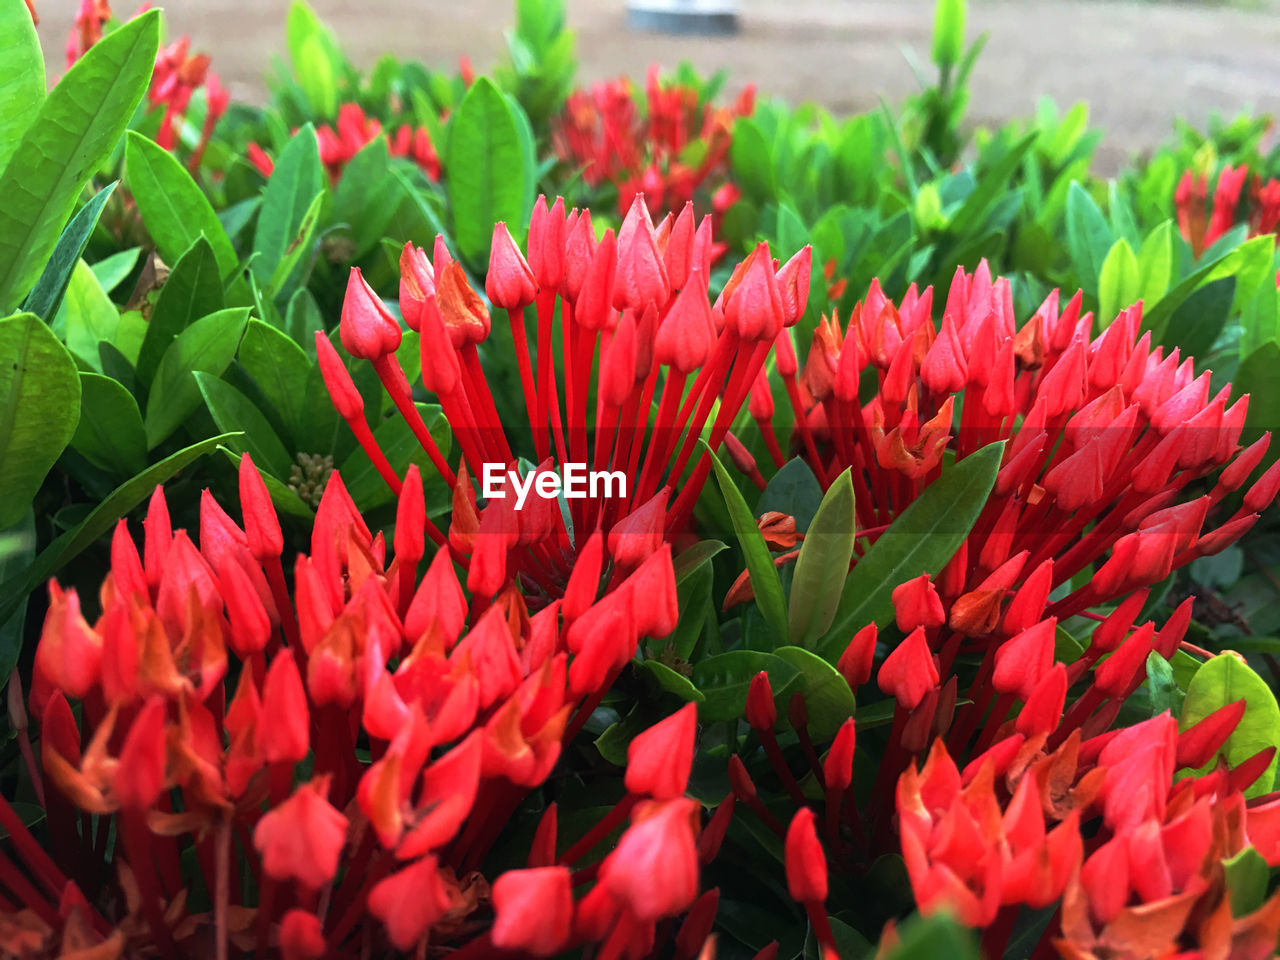 CLOSE-UP OF RED FLOWERS ON PLANT